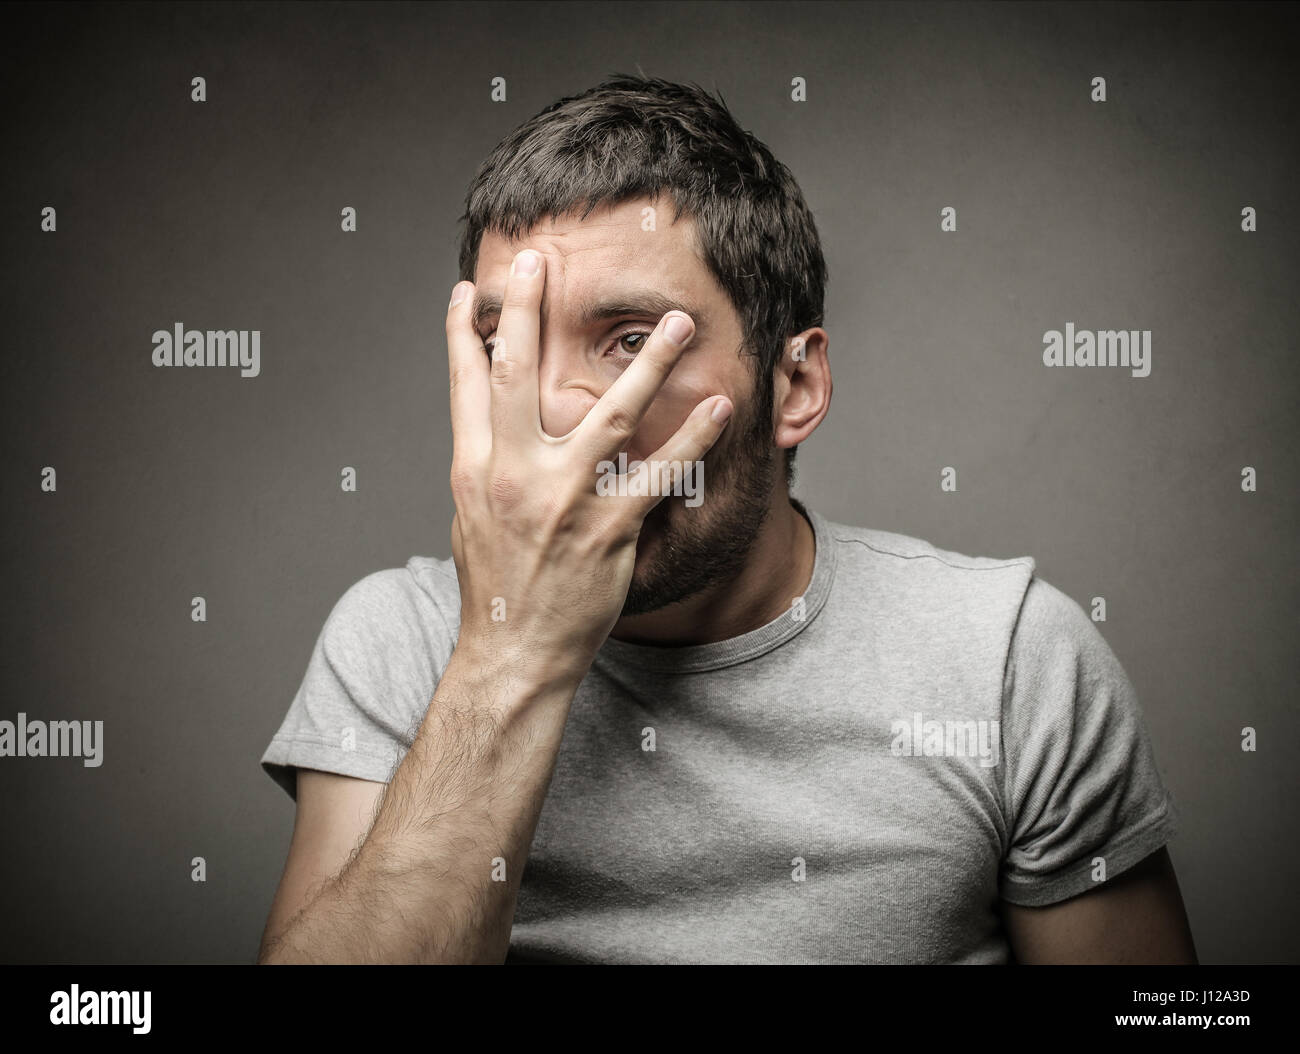 Mad man holding his face Stock Photo